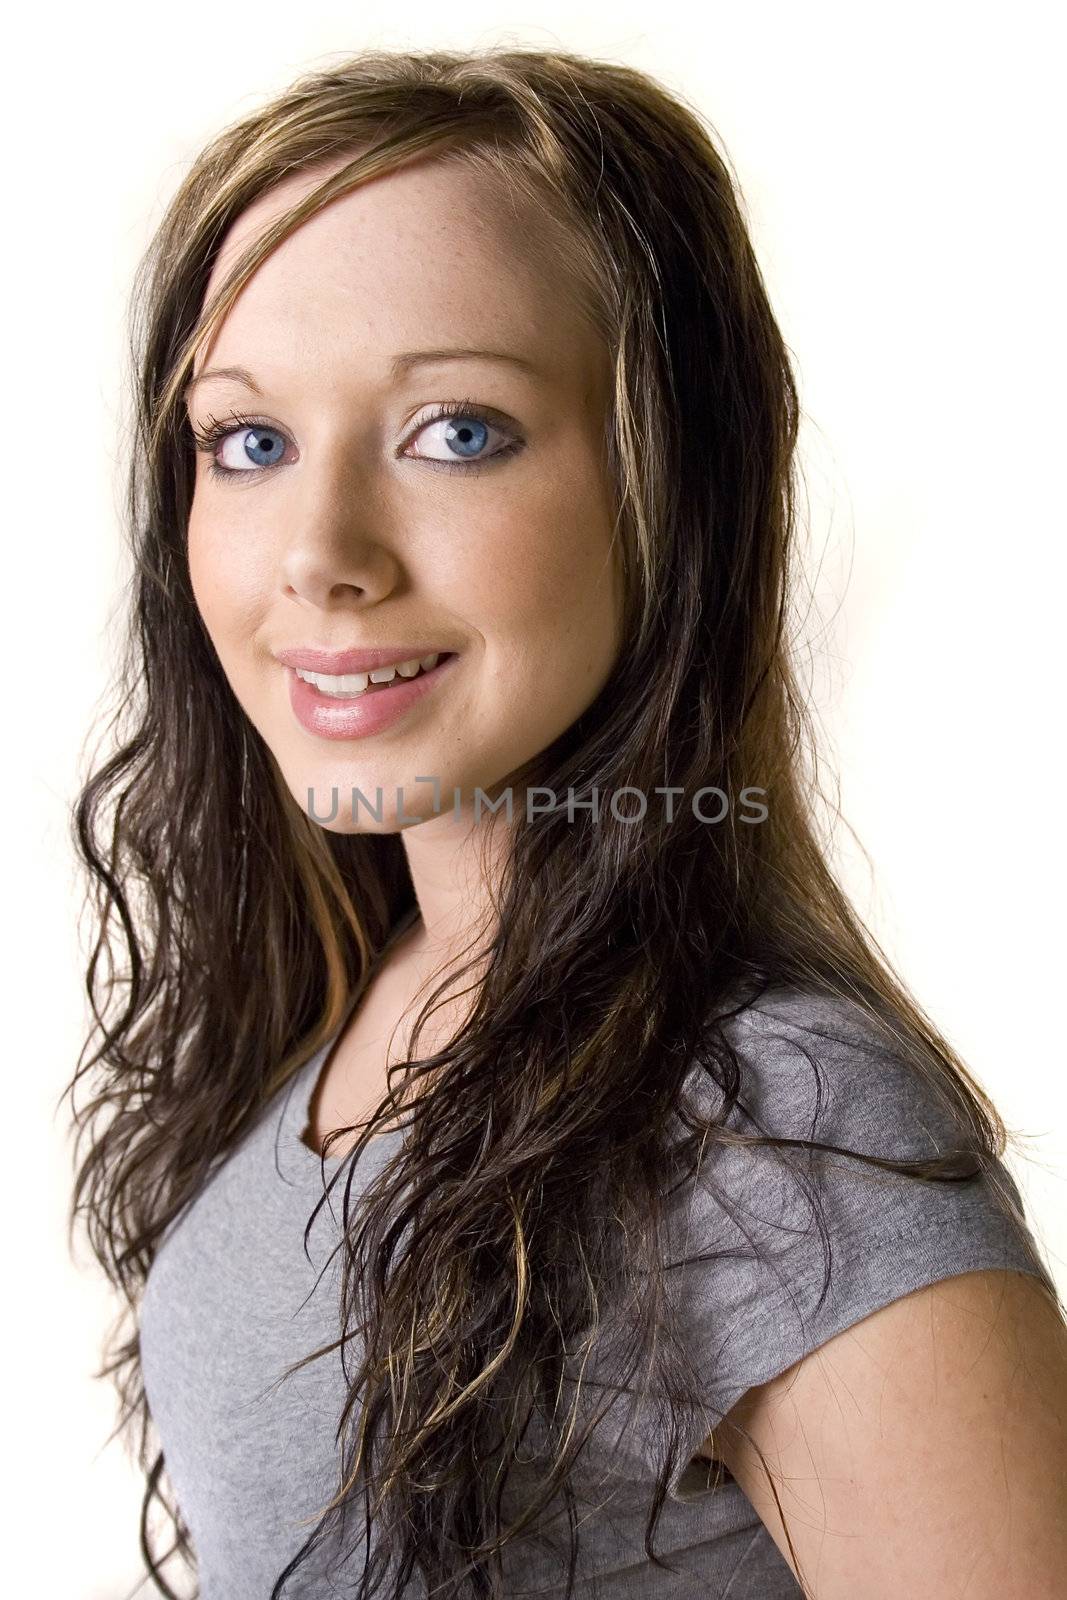 Portrait of a young teenage girl posing